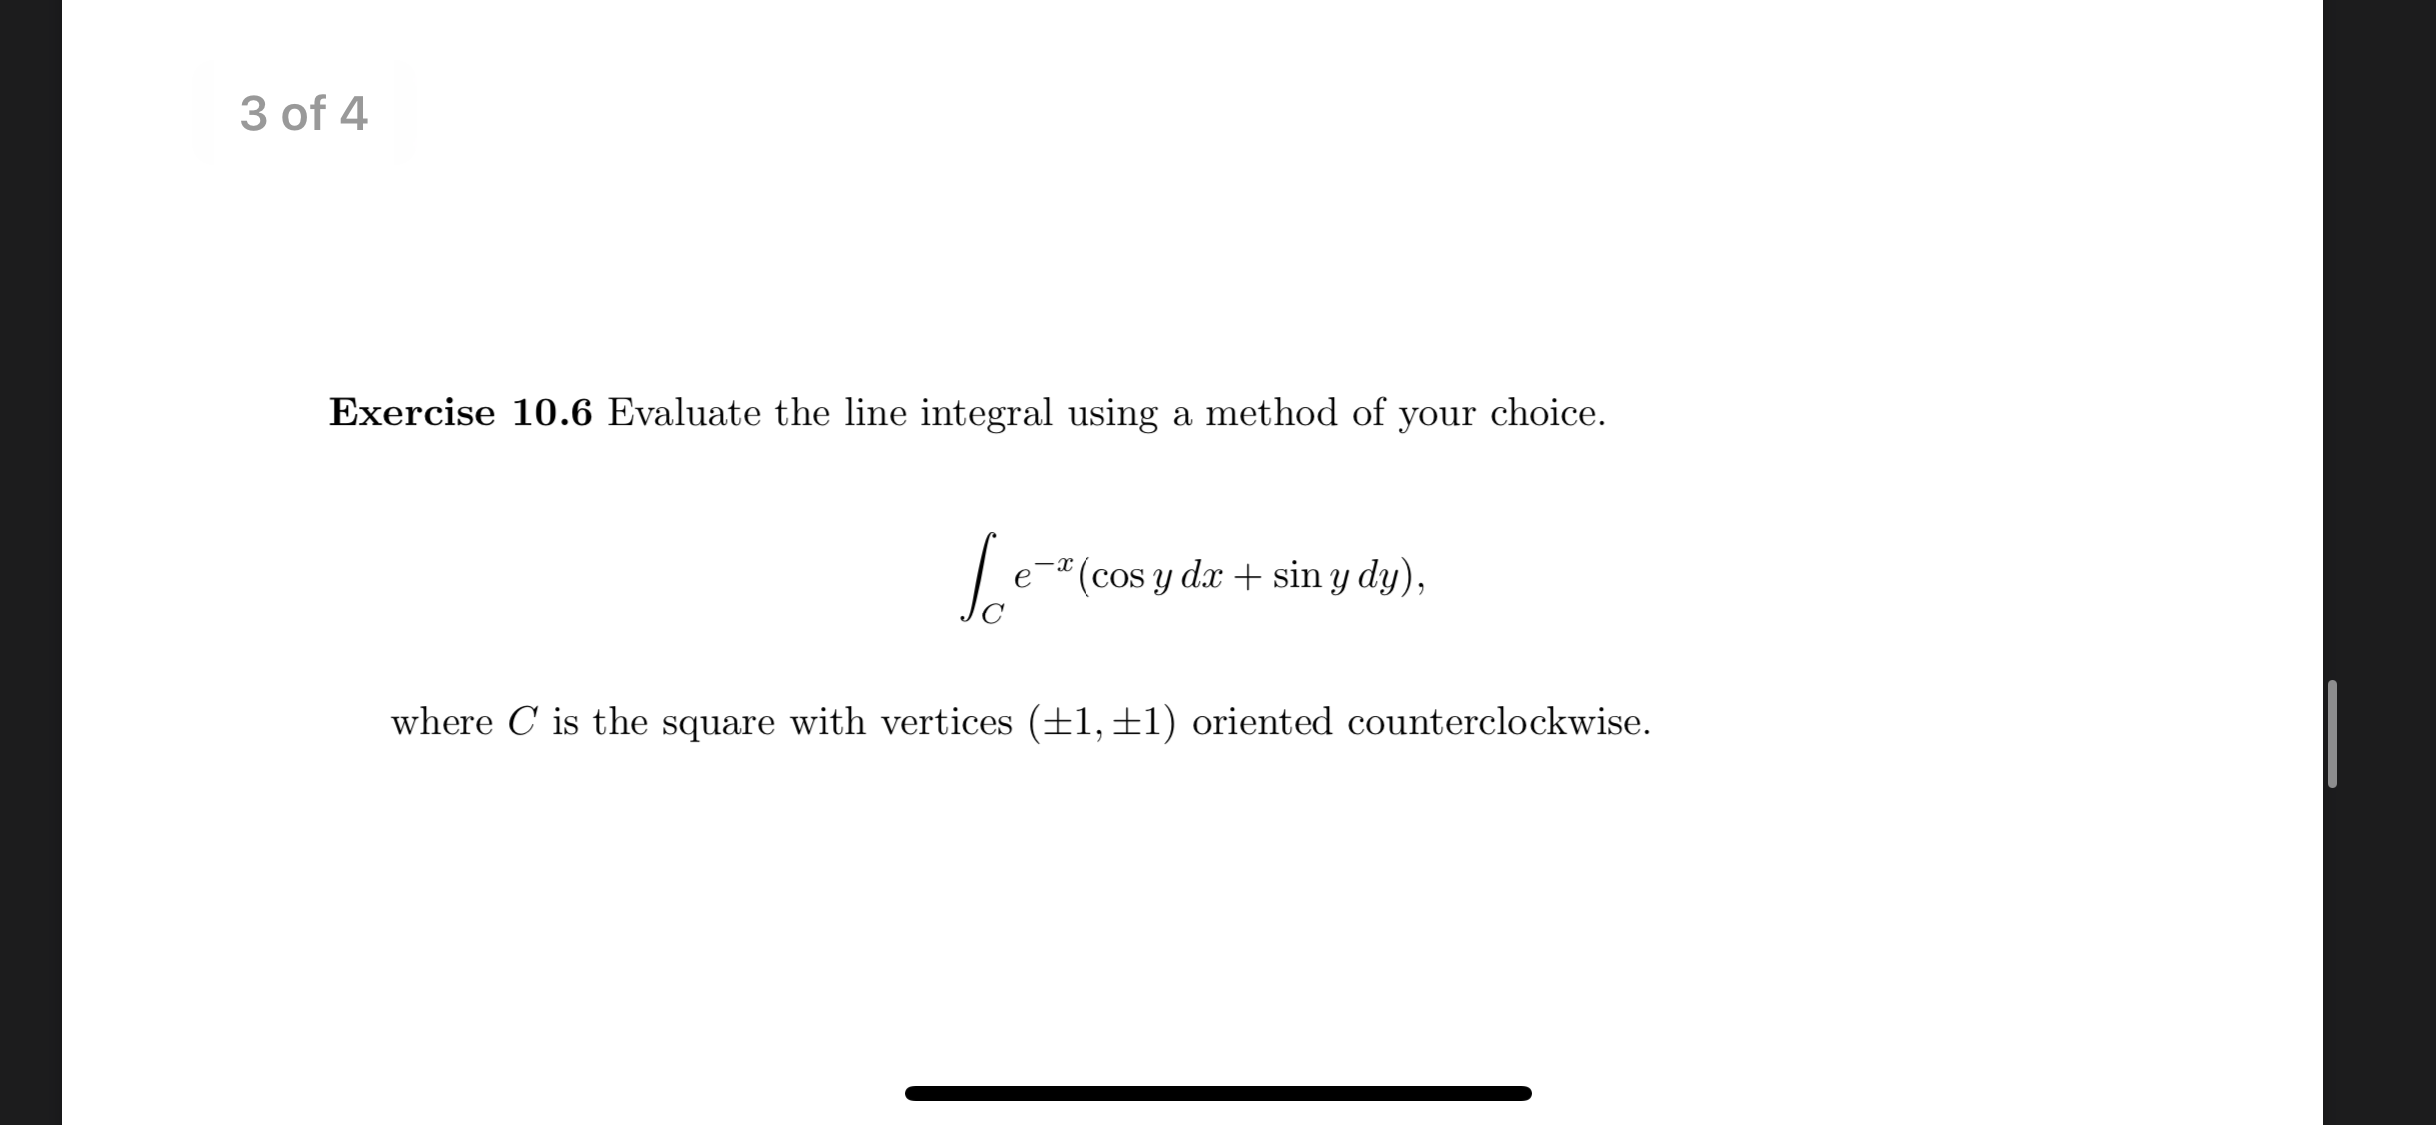 Exercise 10.6 Evaluate the line integral using a method of your choice.
e¯*(cos y dx + sin y dy),
where C is the square with vertices (±1, ±1) oriented counterclockwise.
